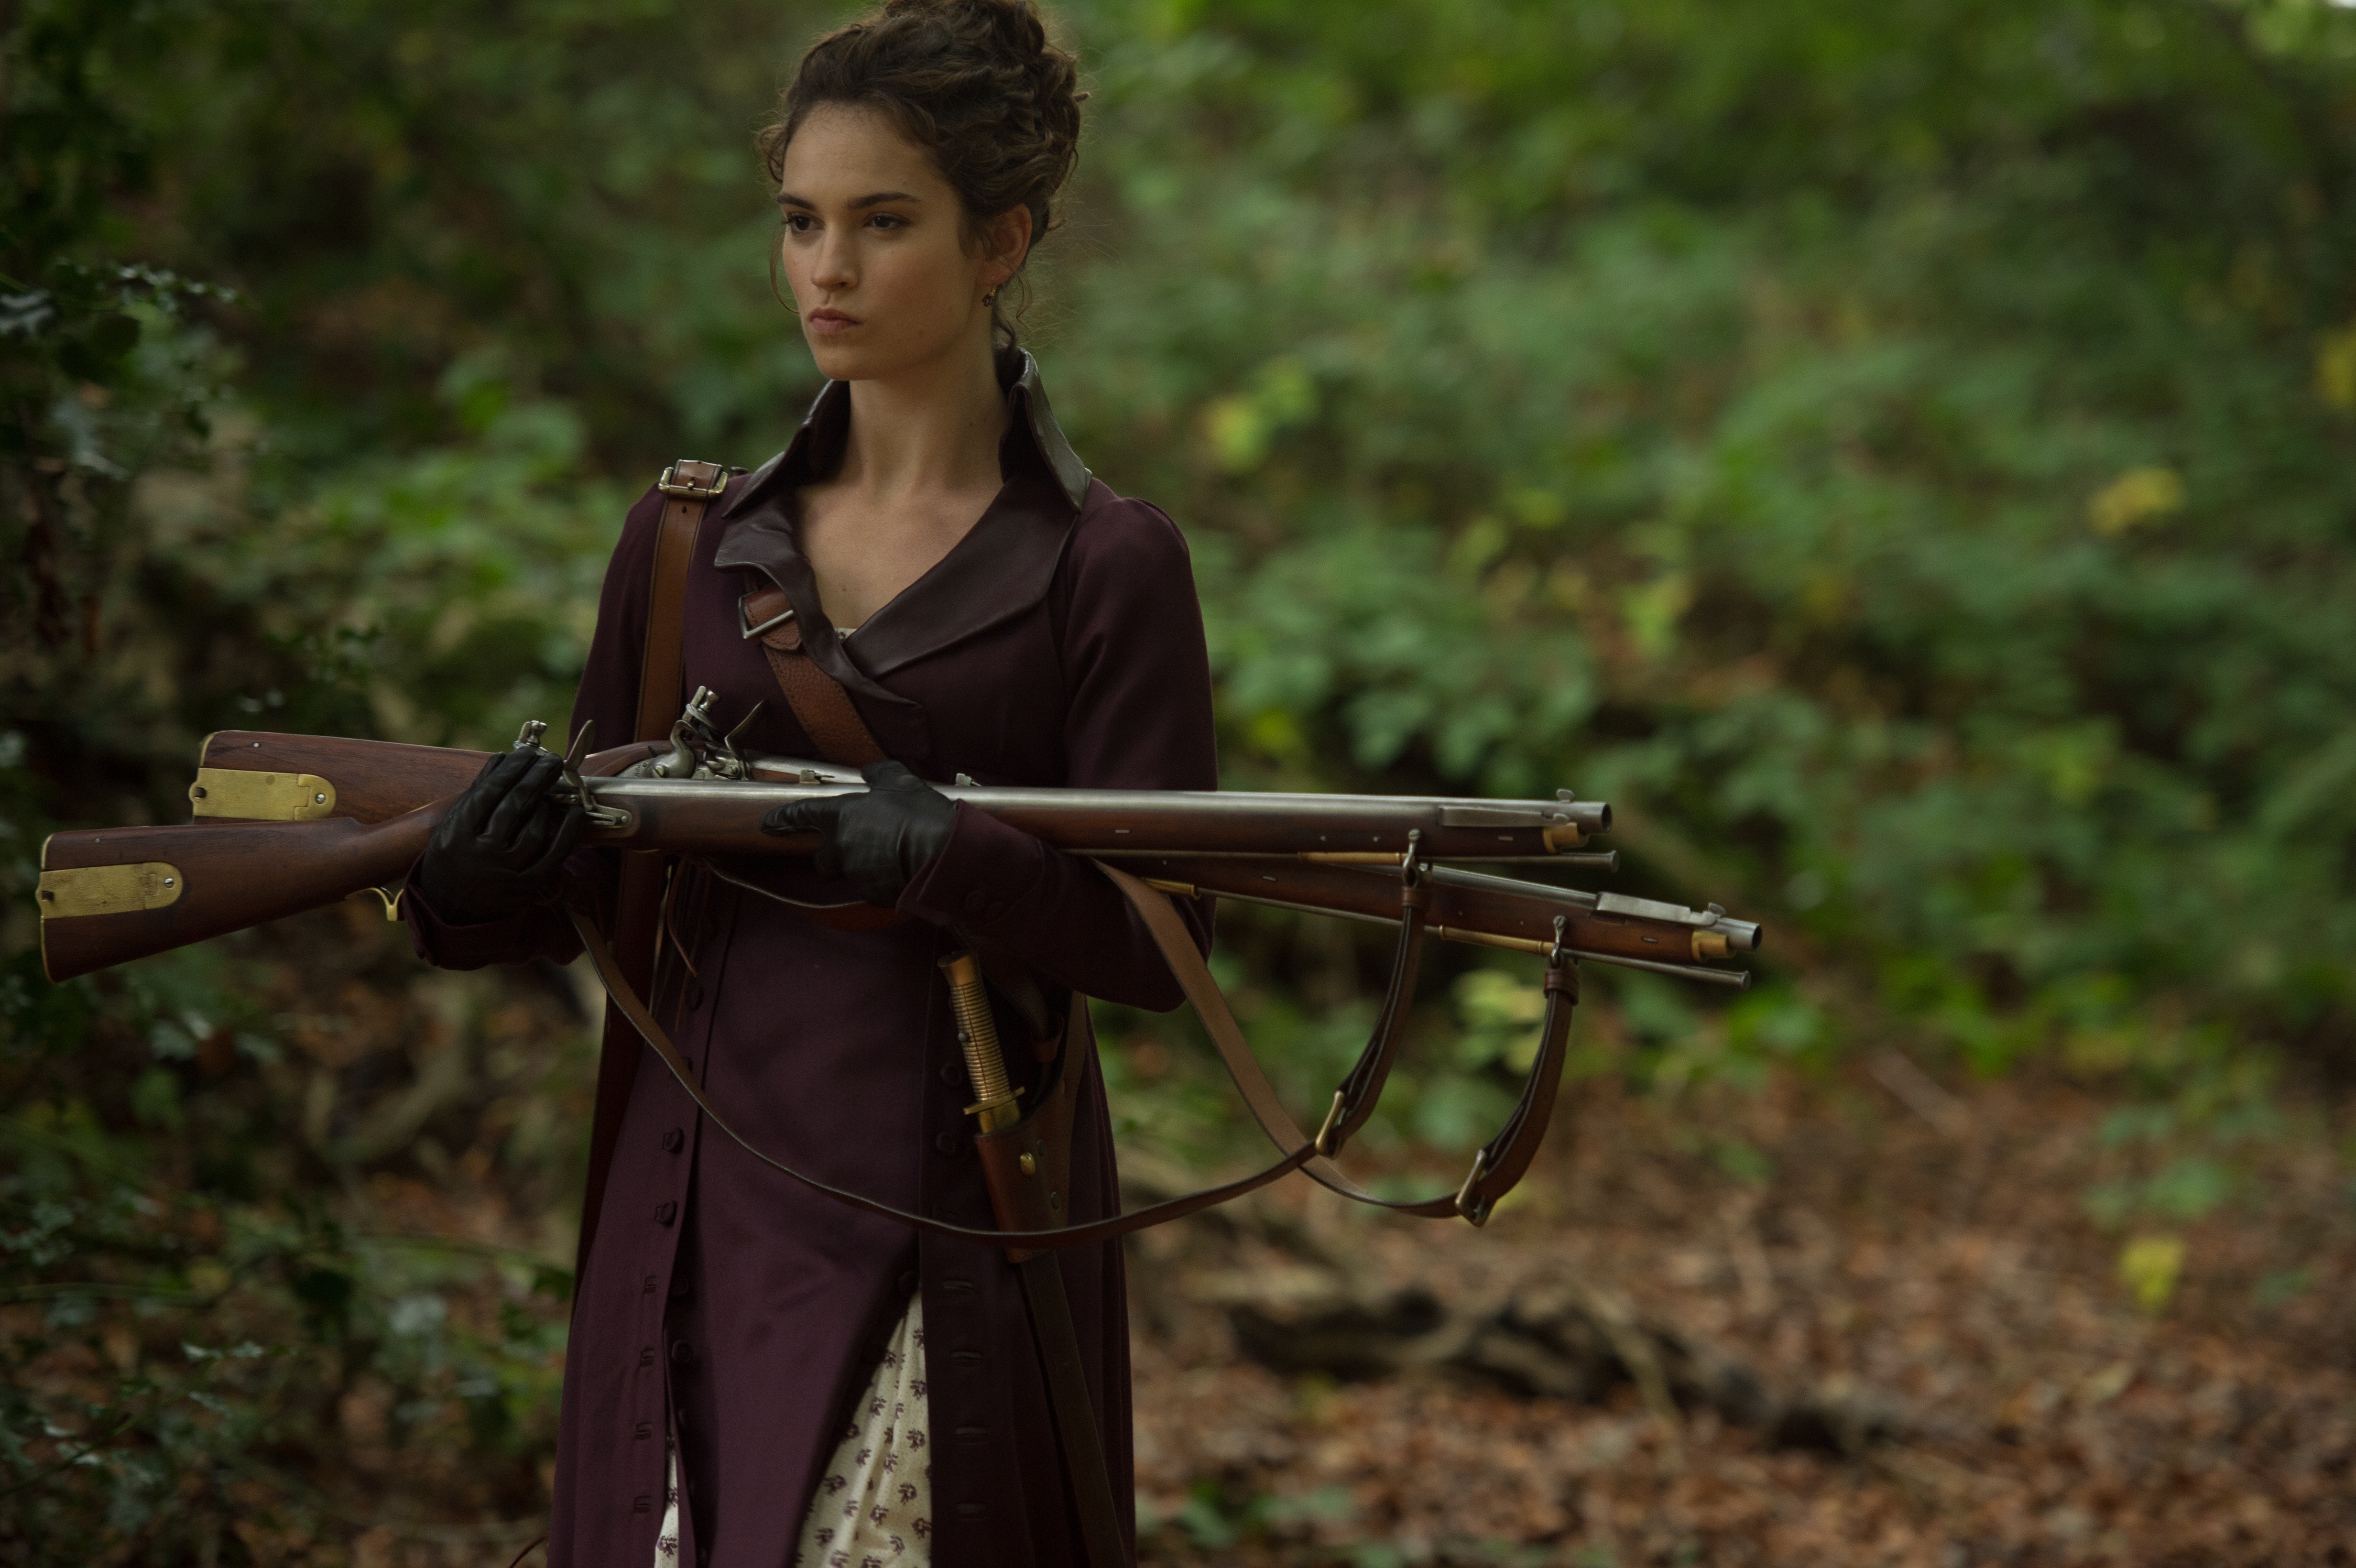 People 4928x3280 women Pride and Prejudice and Zombies Lily James actress brunette girls with guns violet coat purple coat